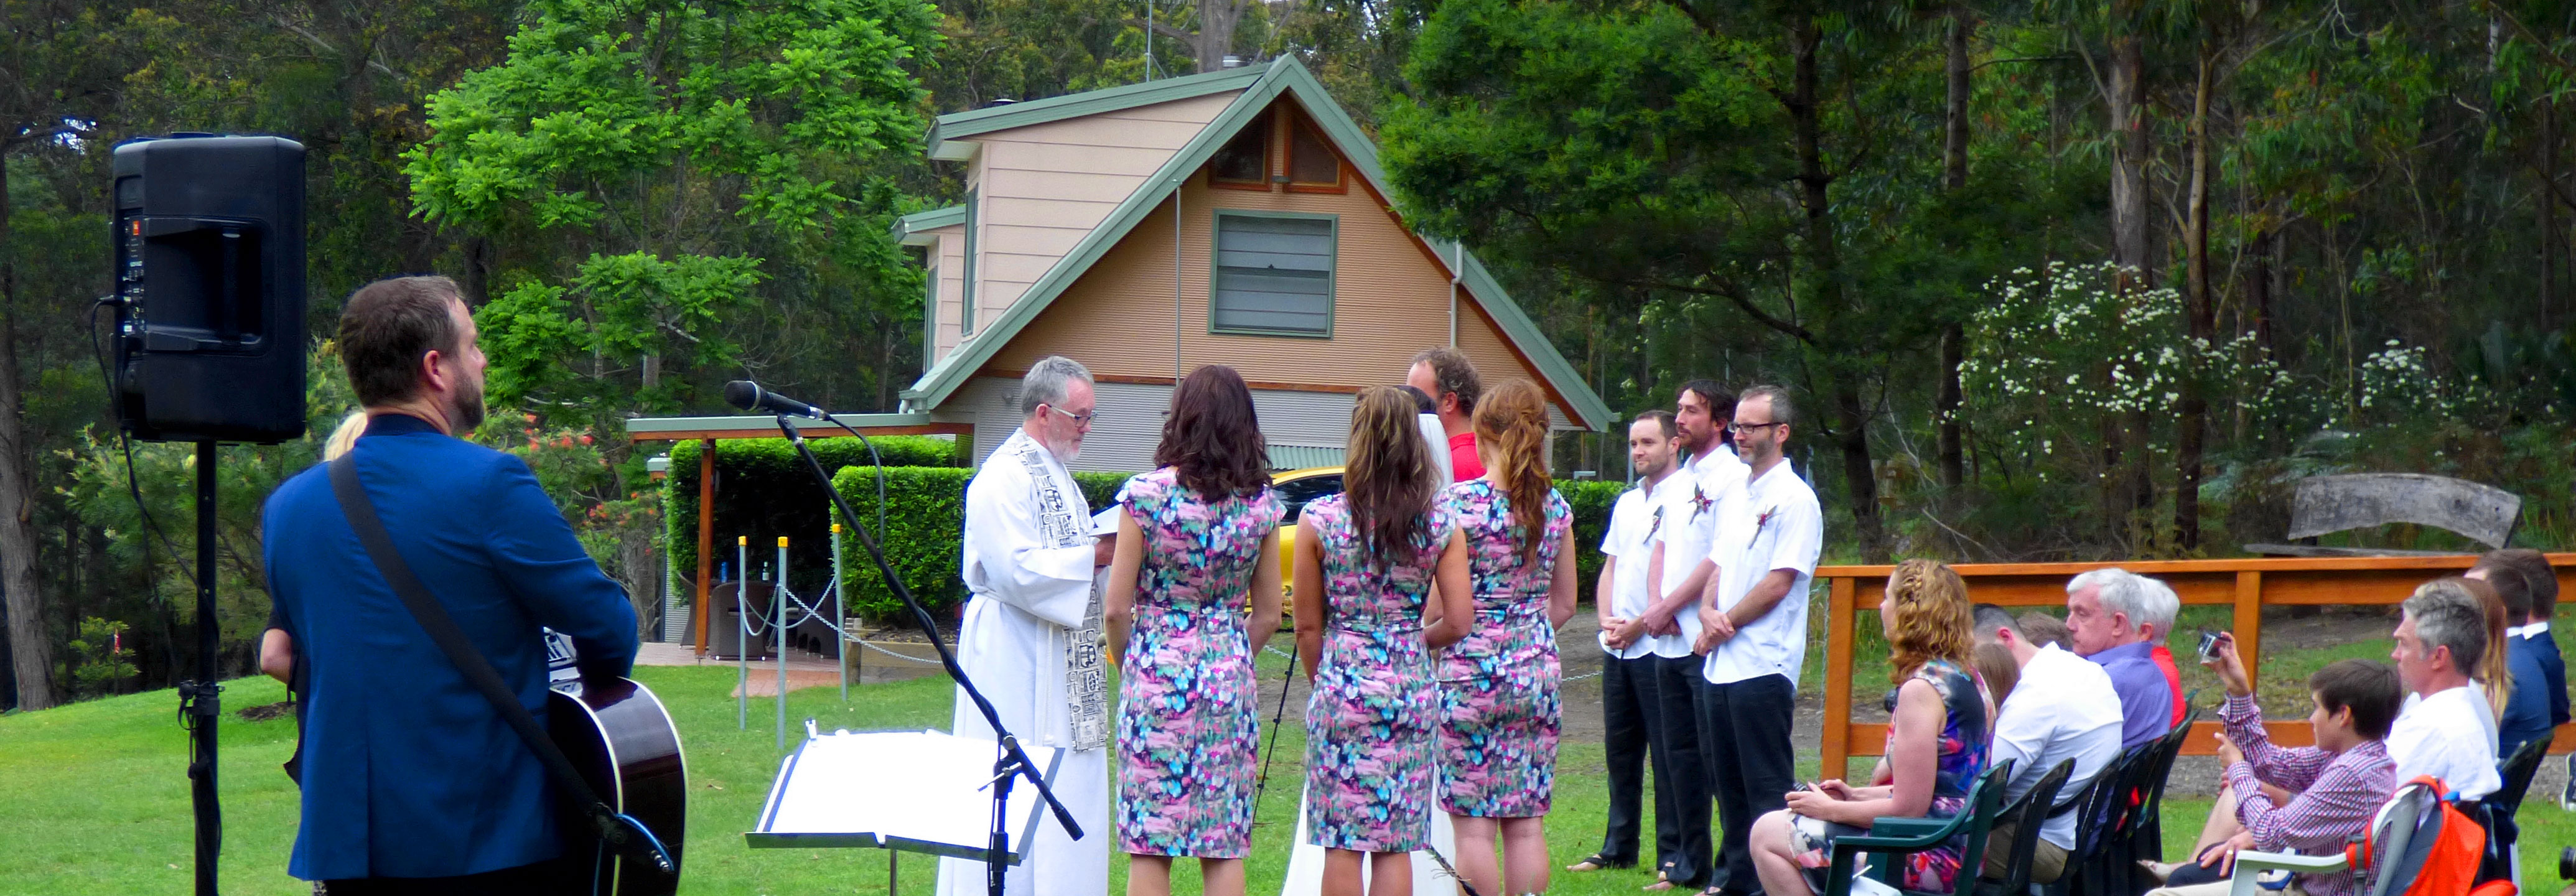 3 Way Split performing live music at an outdoor wedding ceremony